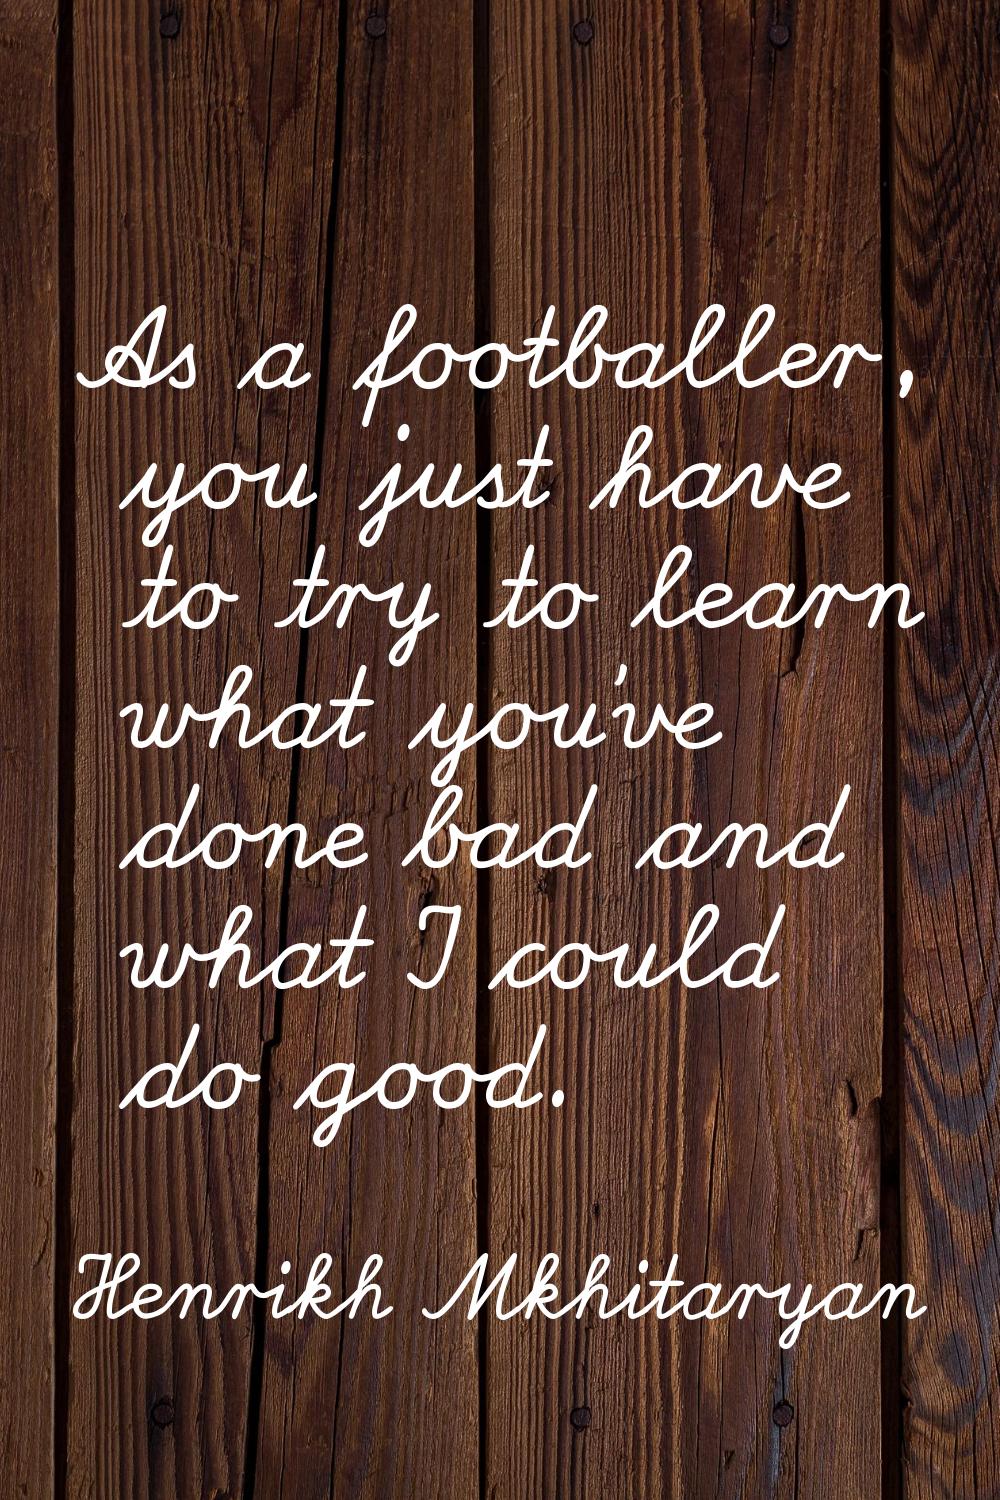 As a footballer, you just have to try to learn what you've done bad and what I could do good.